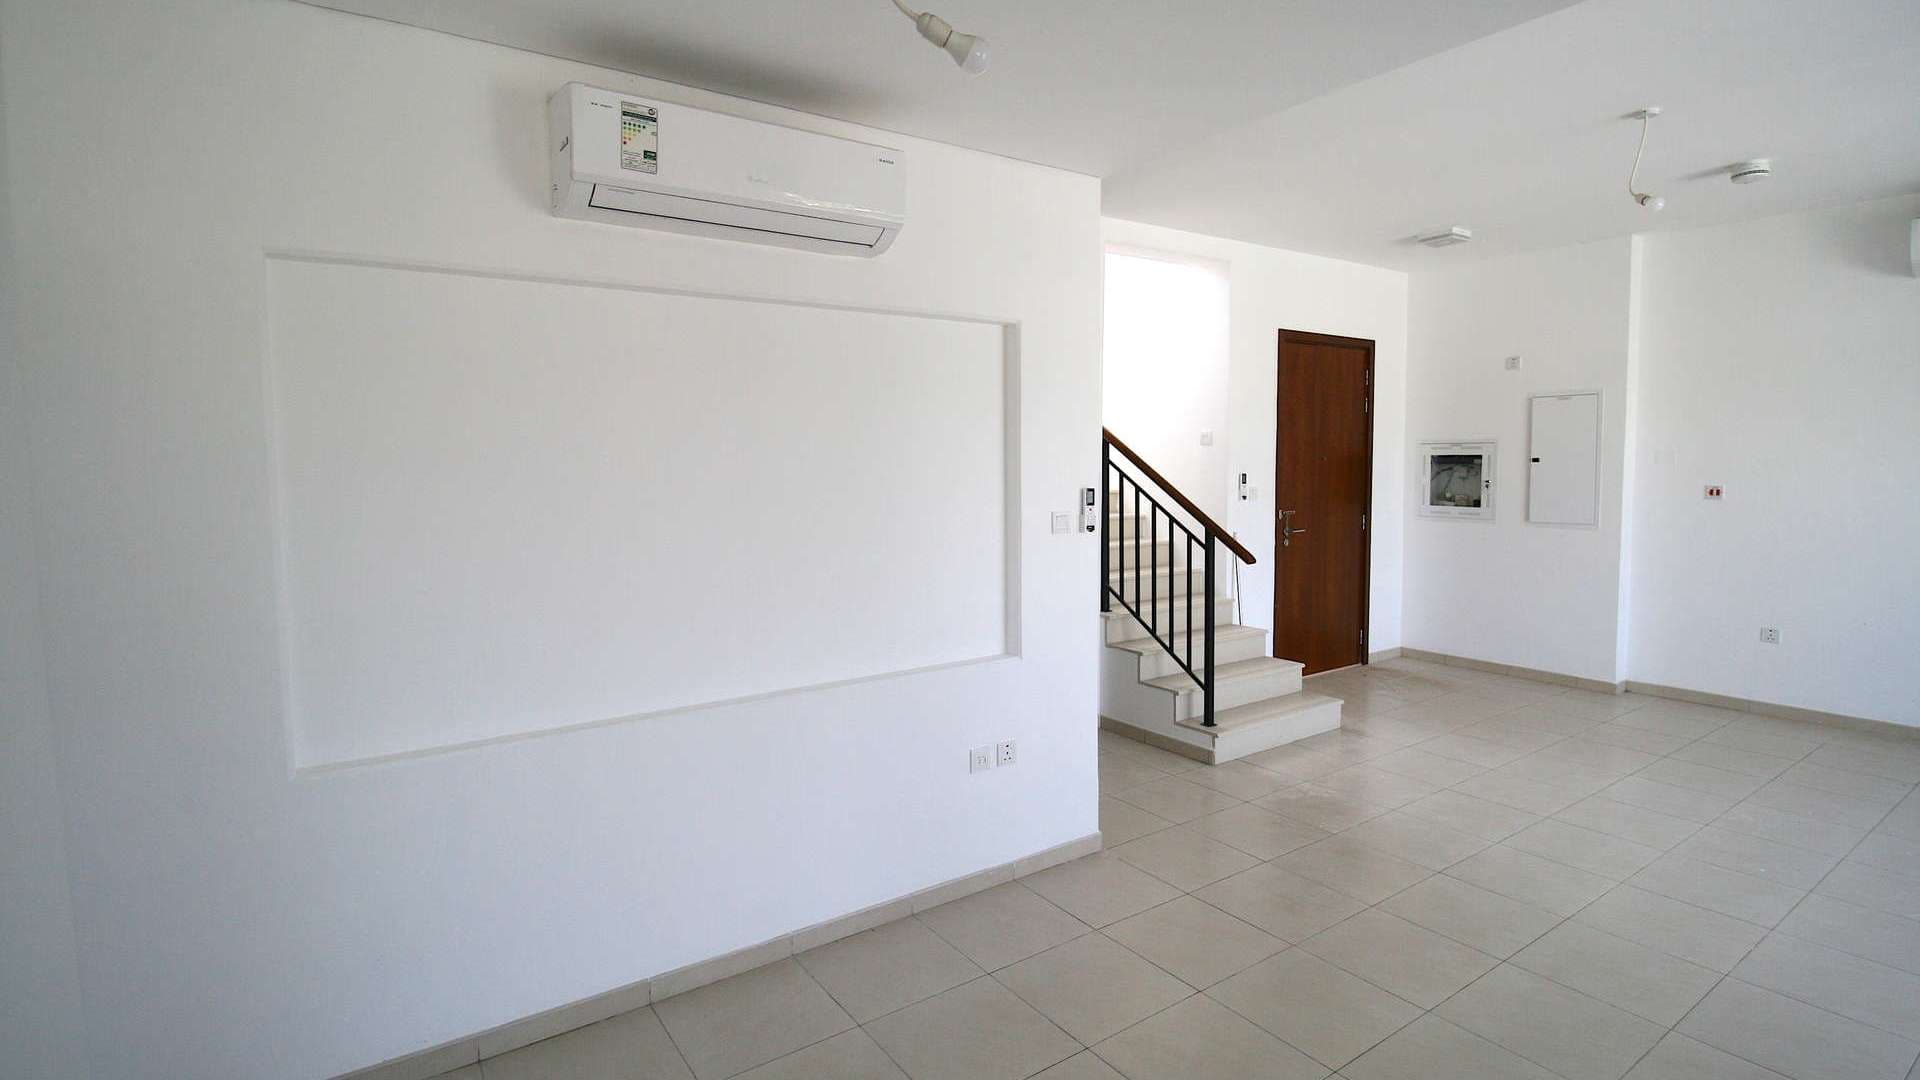 3 Bedroom Townhouse For Sale Zahra Townhouses Lp09039 1ac79c49913be800.jpeg